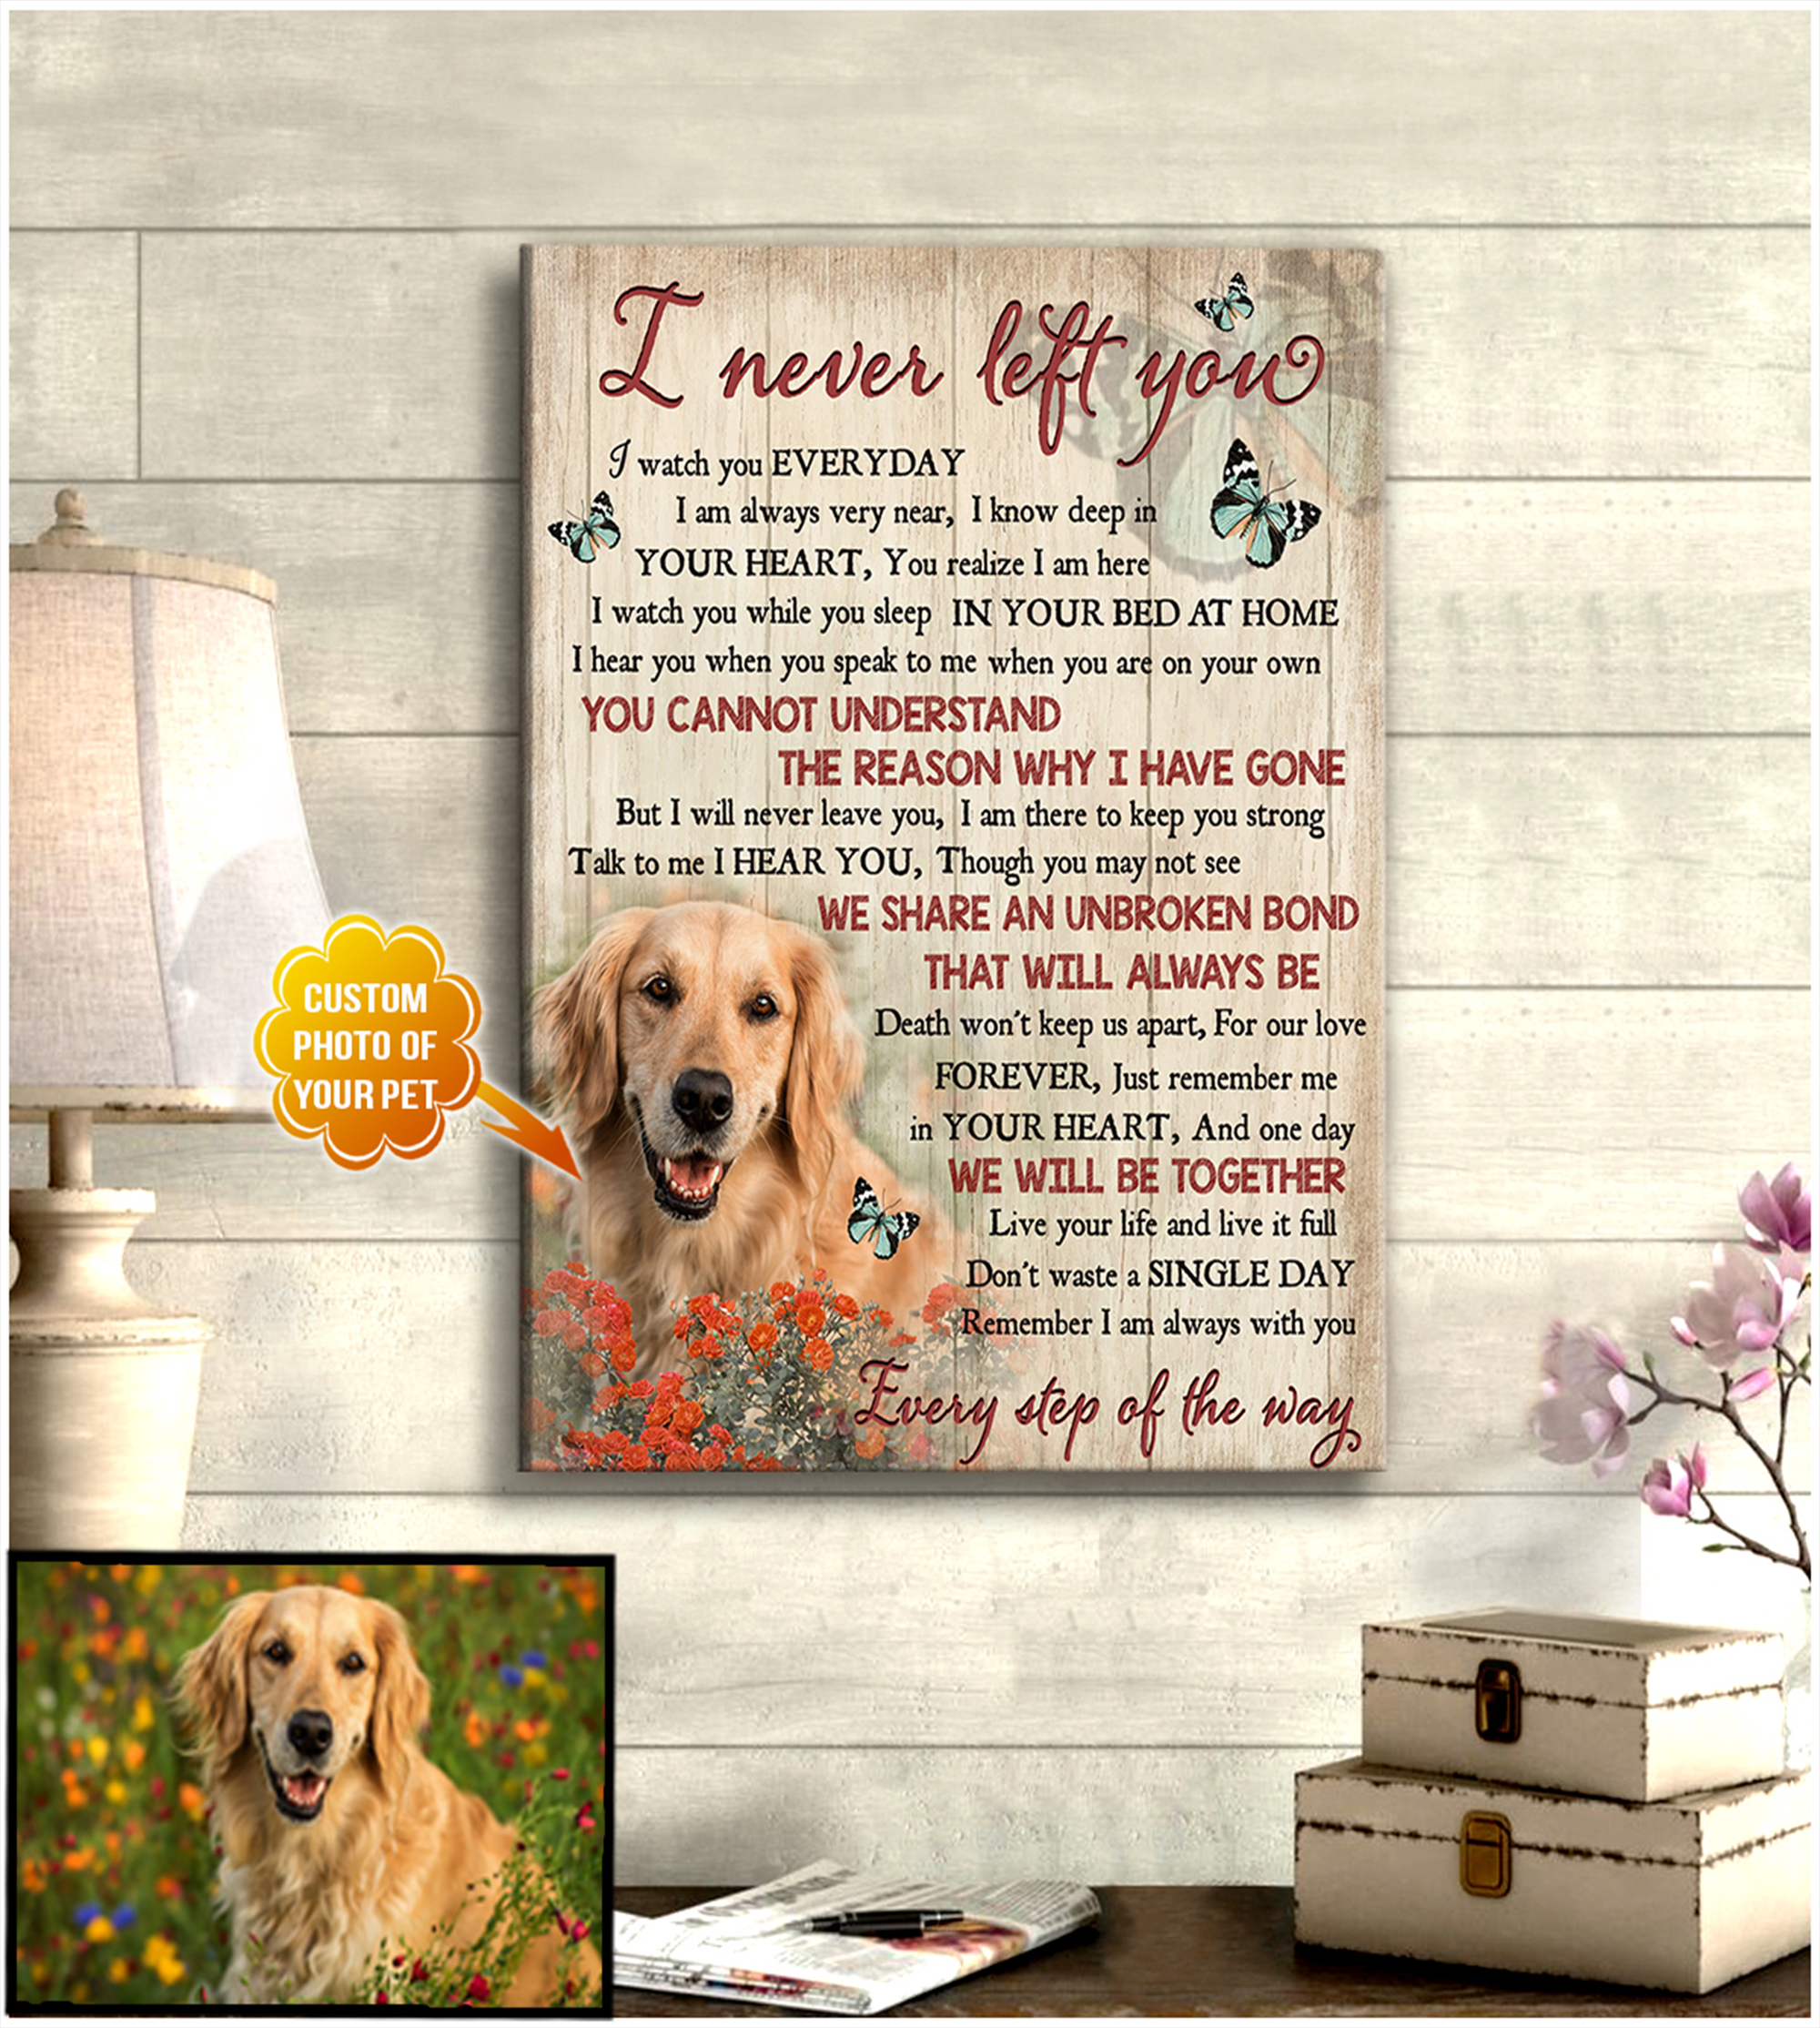 Personalized Dog Portrait Canvas, Custom Photo Of Your Pet, I Never Left You Wall Art Canvas, Perfect Gift For Dog Lovers, Friends, Family